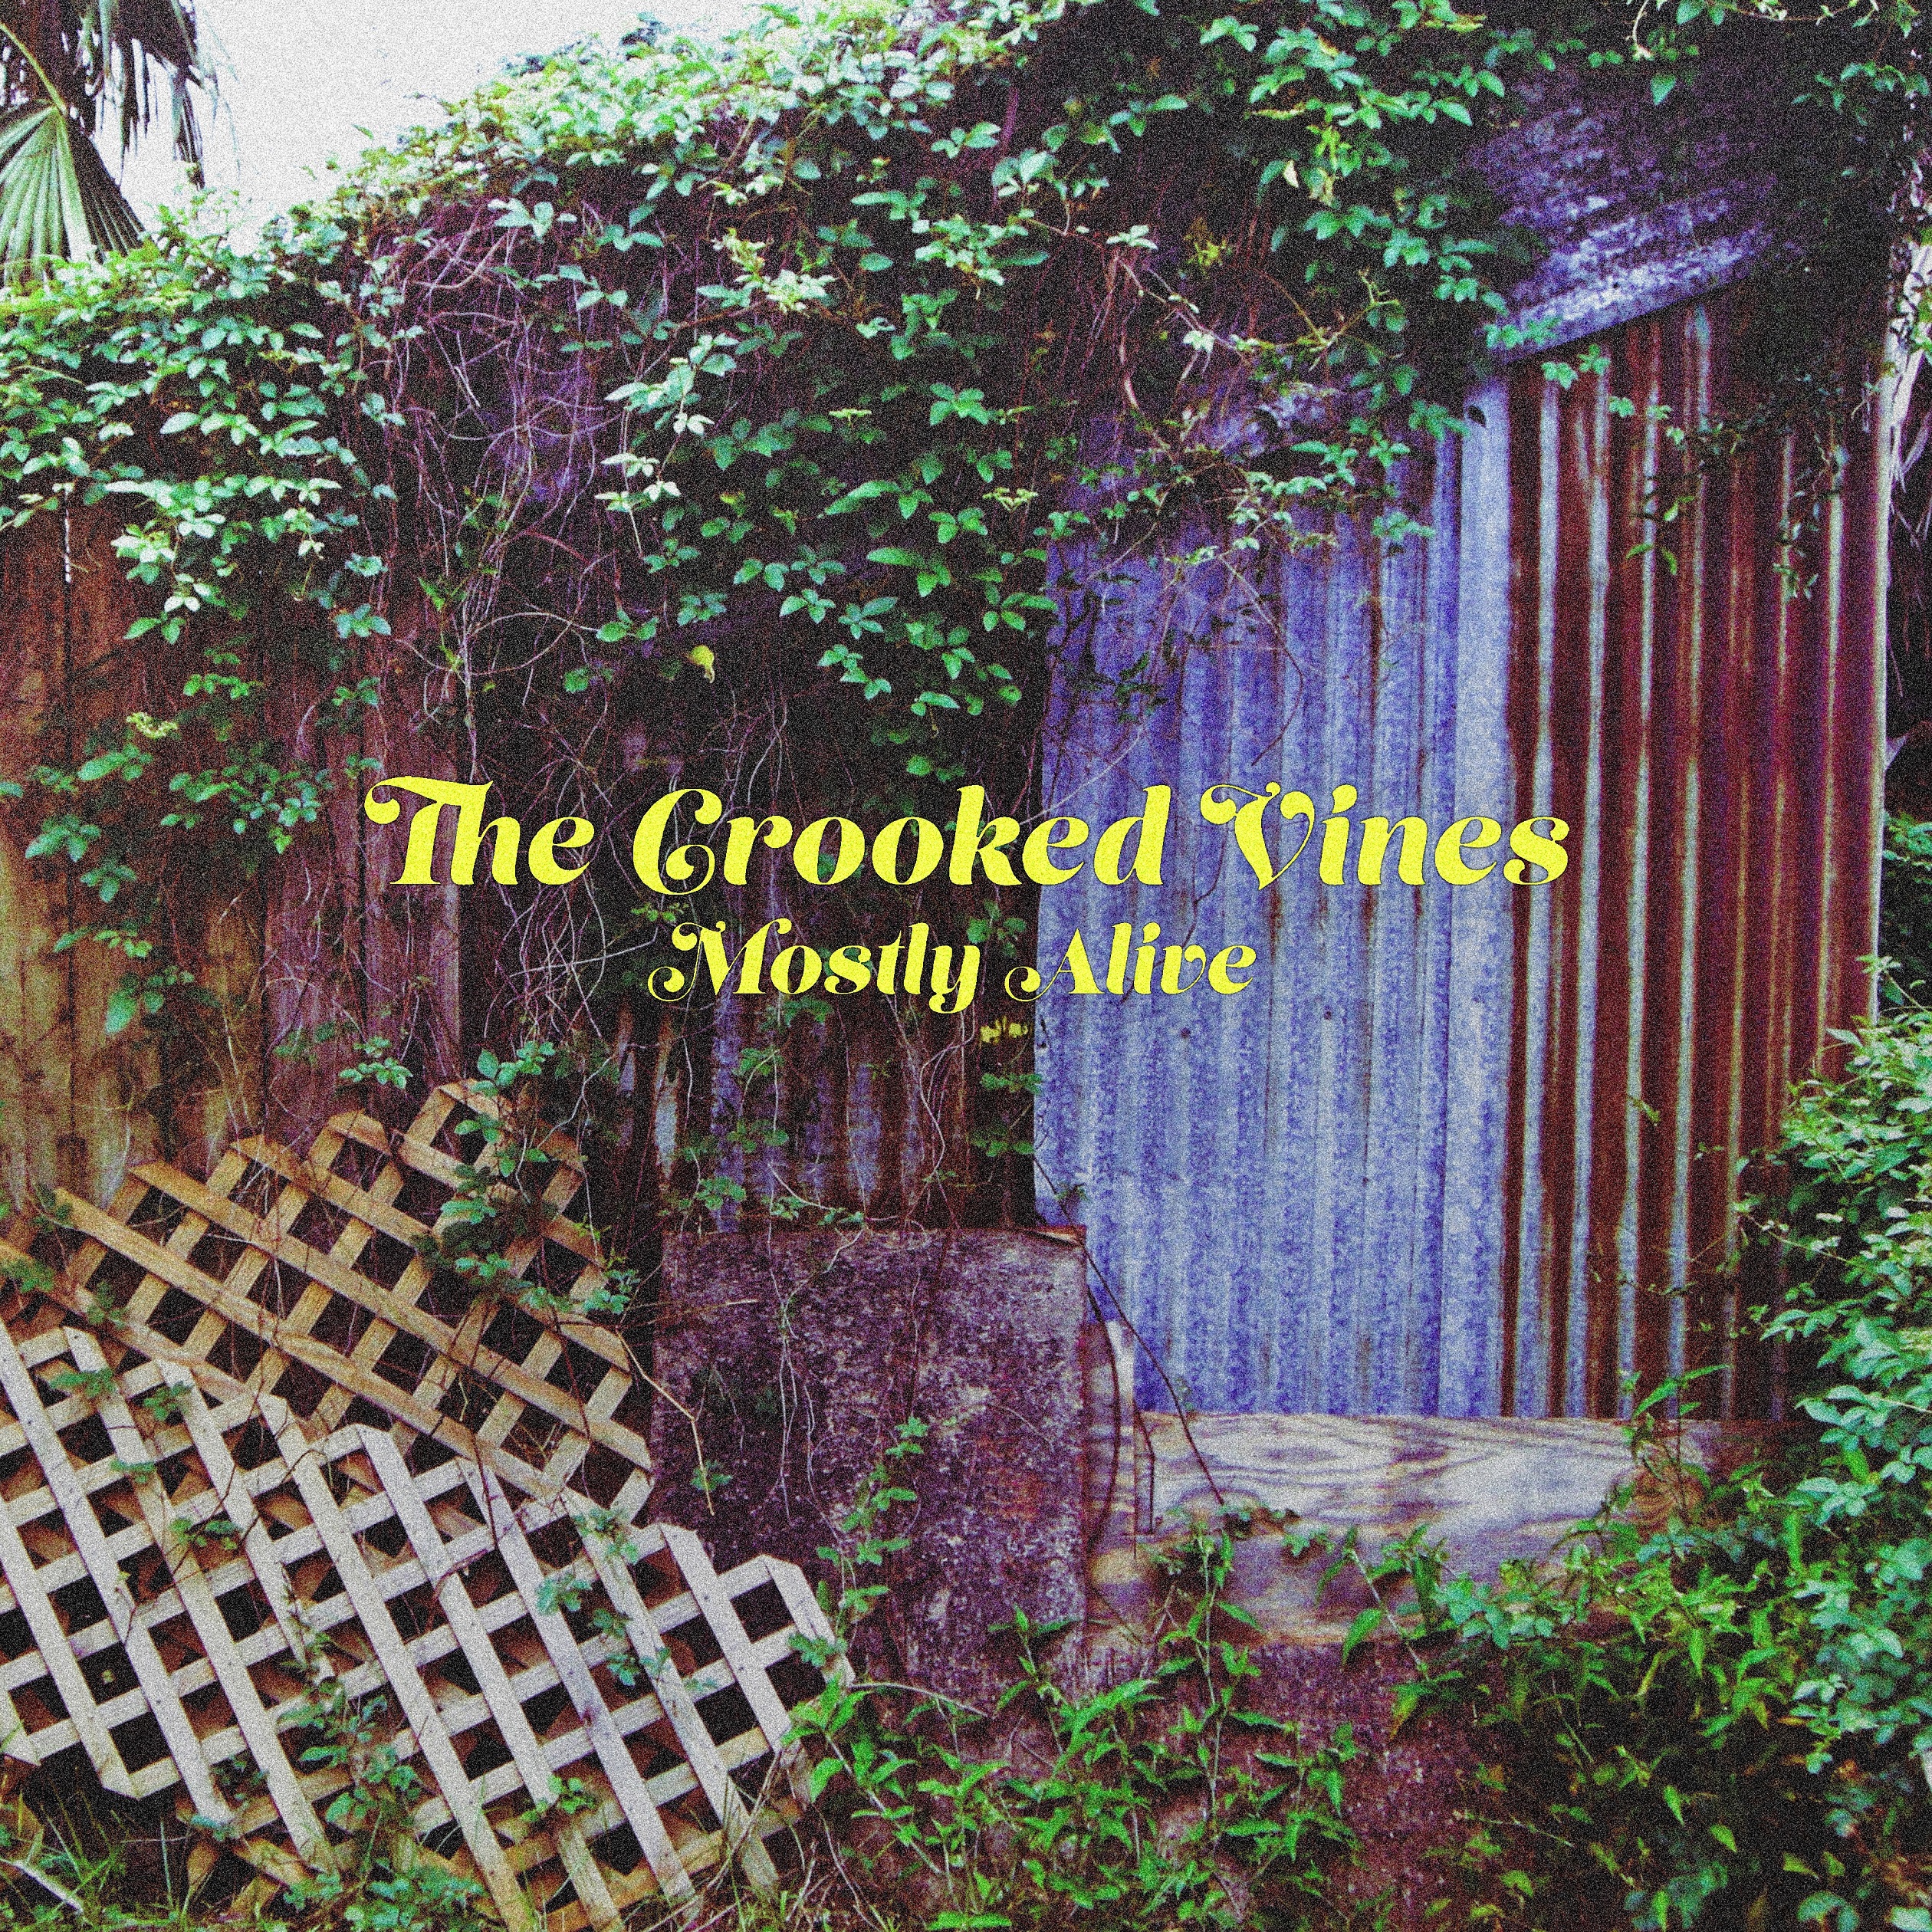 The Crooked Vines release their semi-live, third album “Mostly Alive”